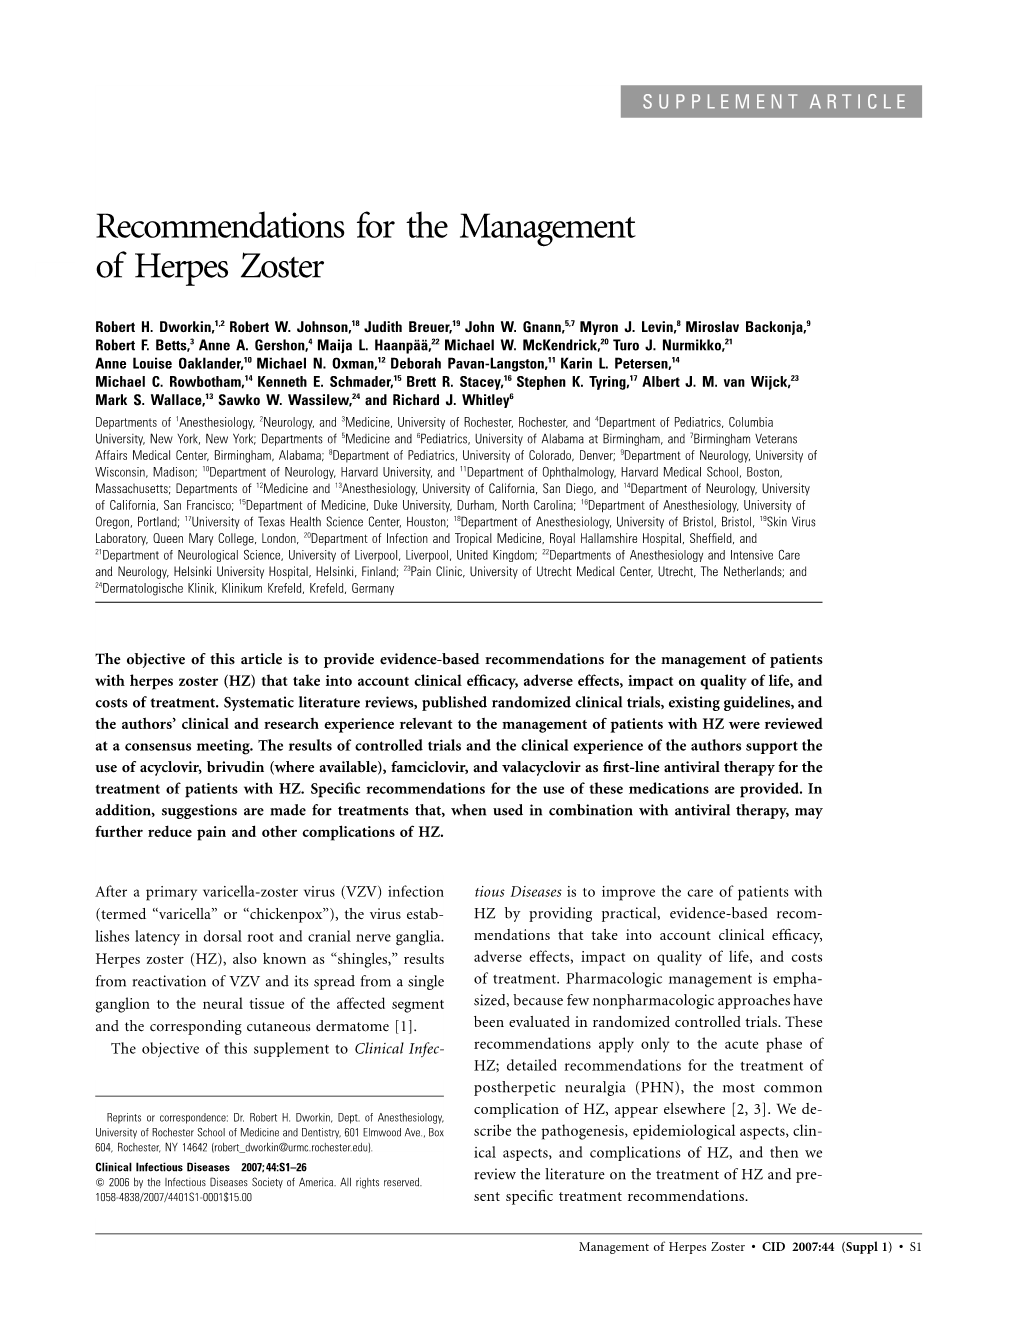 Recommendations for the Management of Herpes Zoster